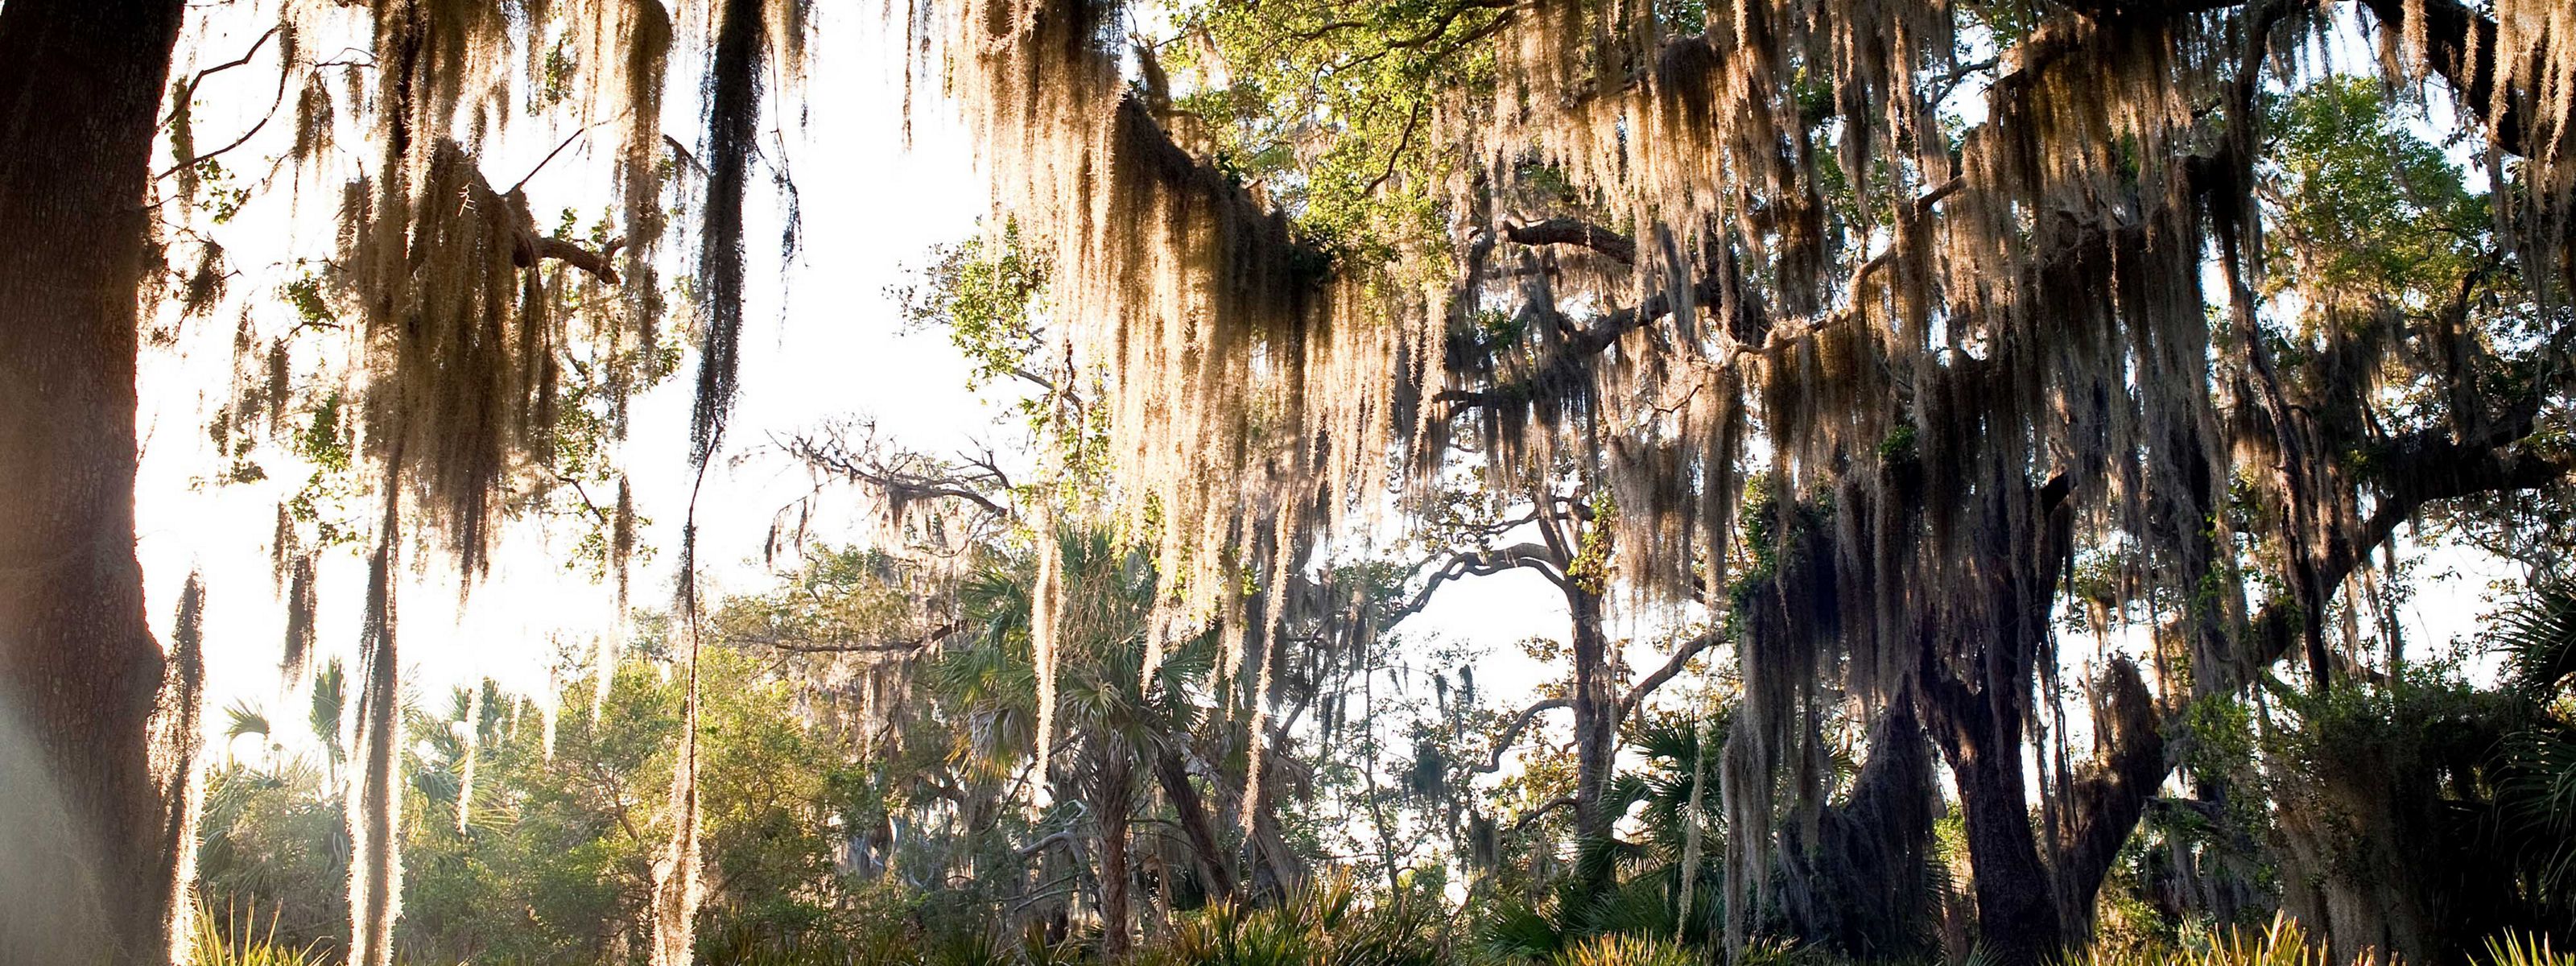 Spanish moss draped over tree branches in coastal maritime forest.